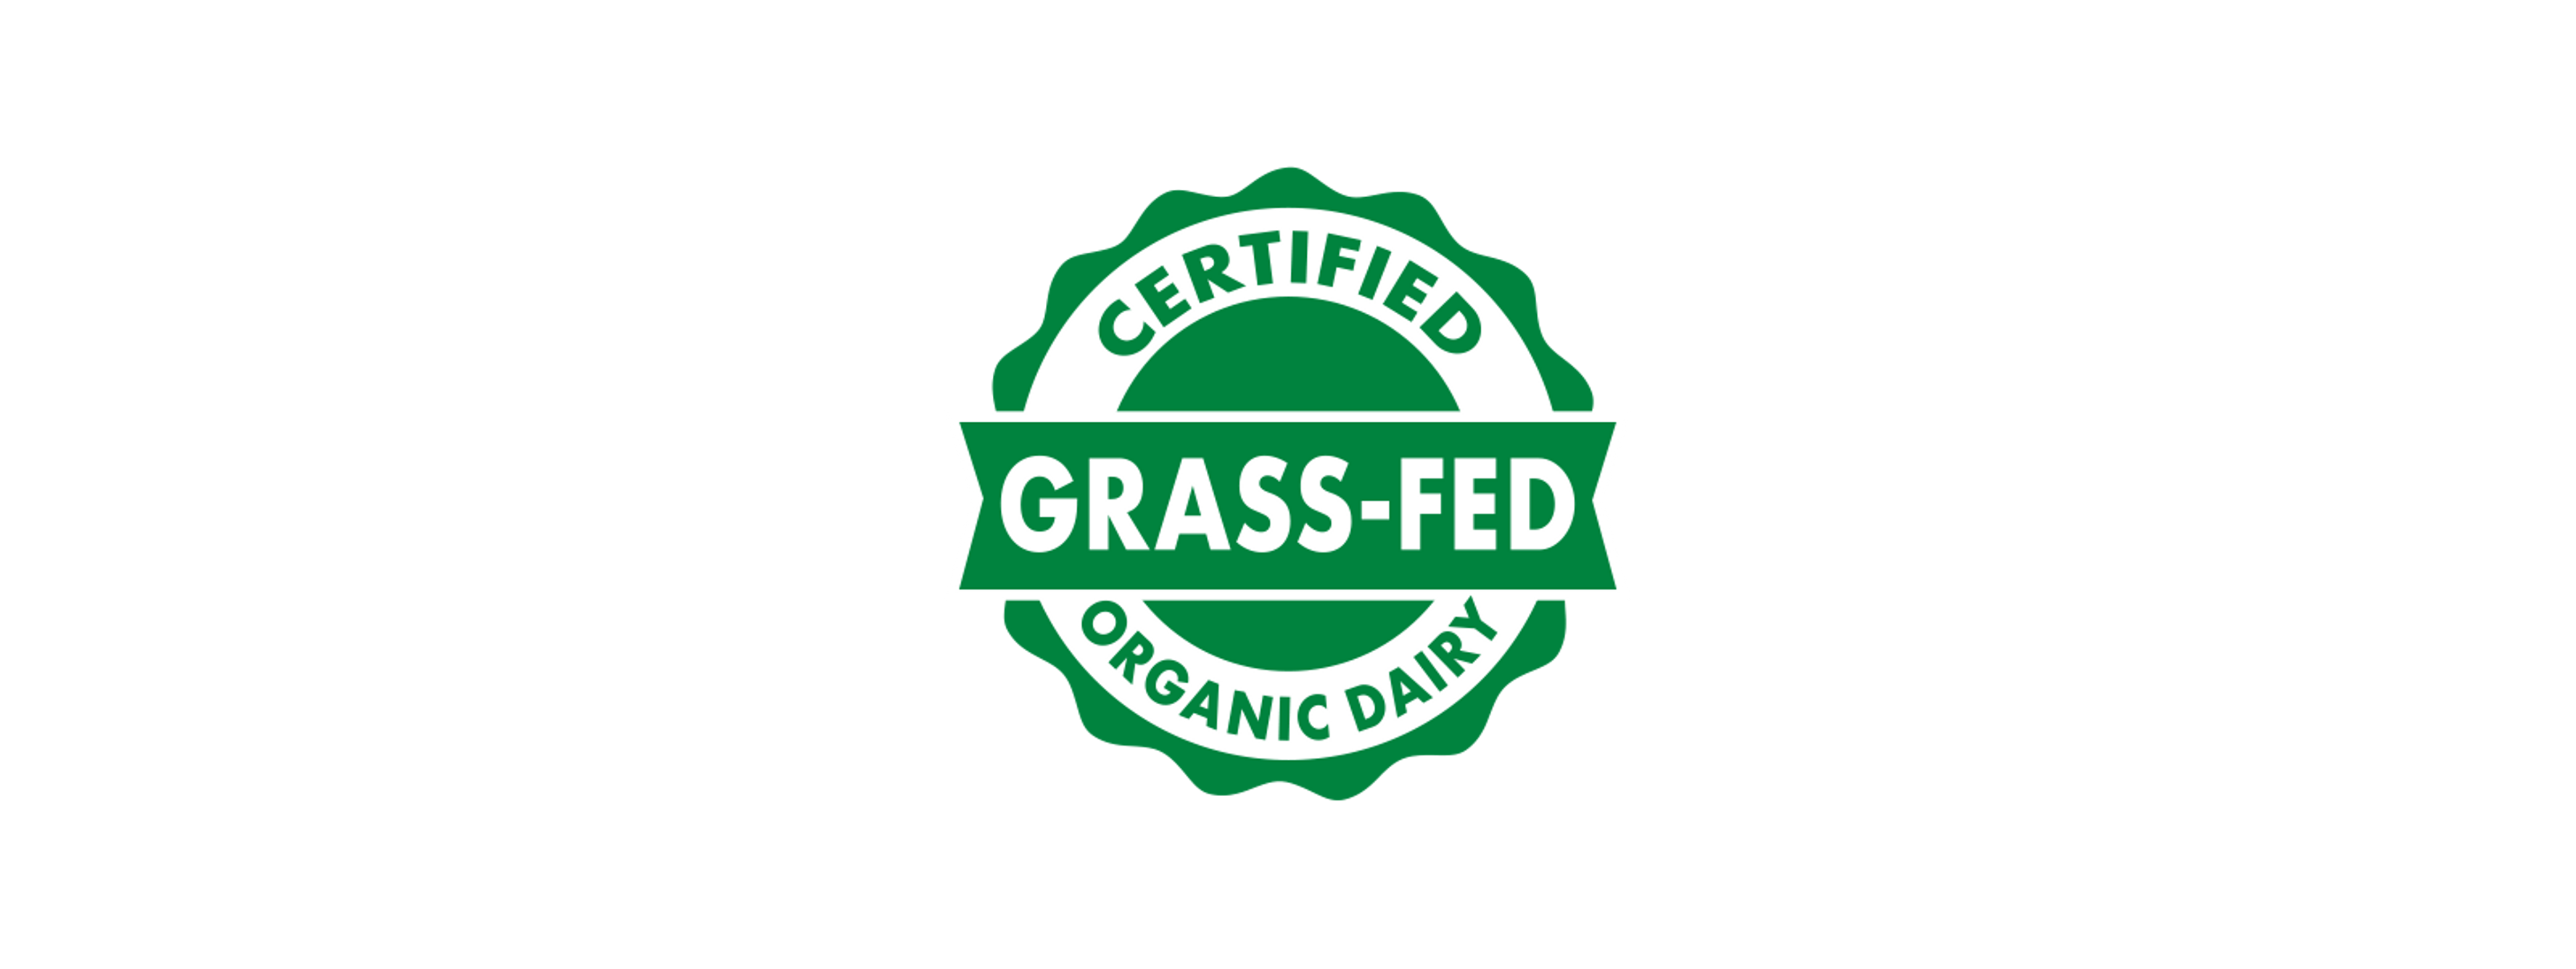 The green and white certified grass-fed organic dairy seal.